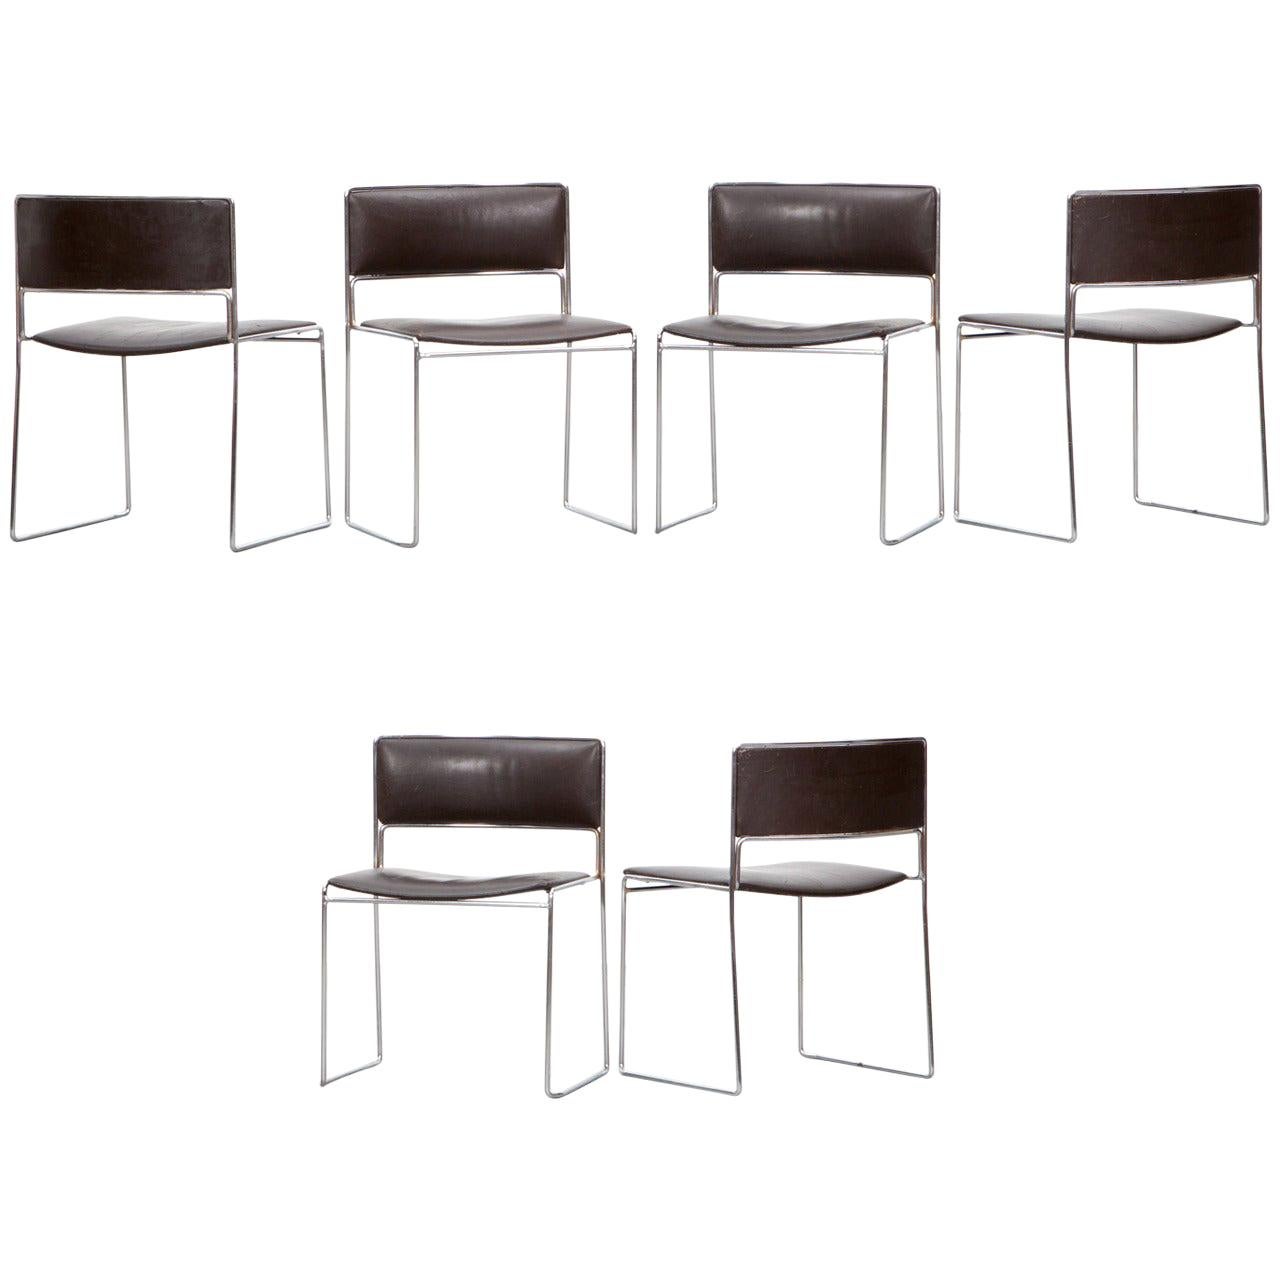 1960s Brown Leather, Chrome Frame Stacking Chairs by Fabricius / Kastholm